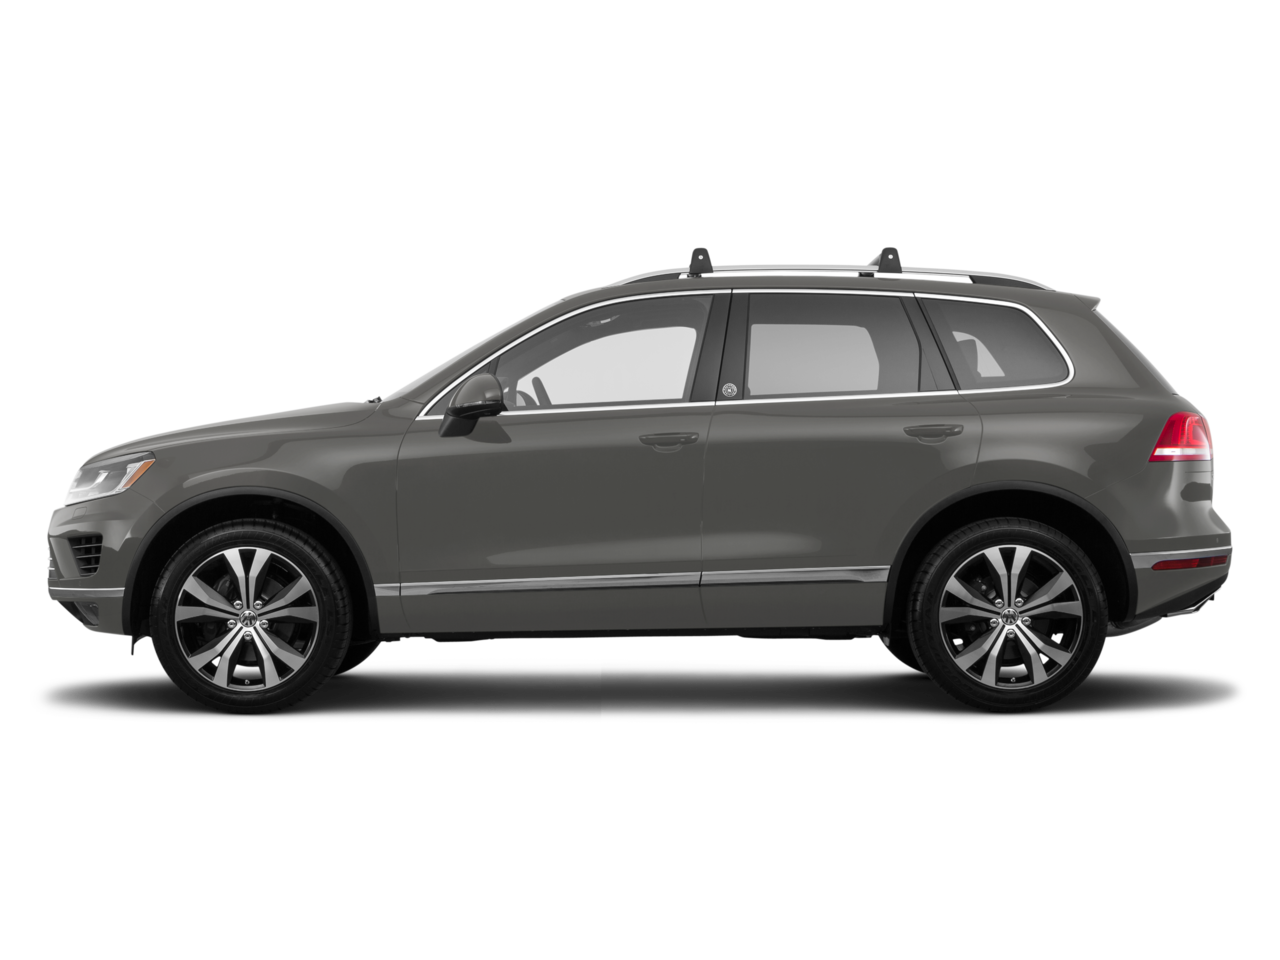 Volkswagen Touareg PNG Clipart Background